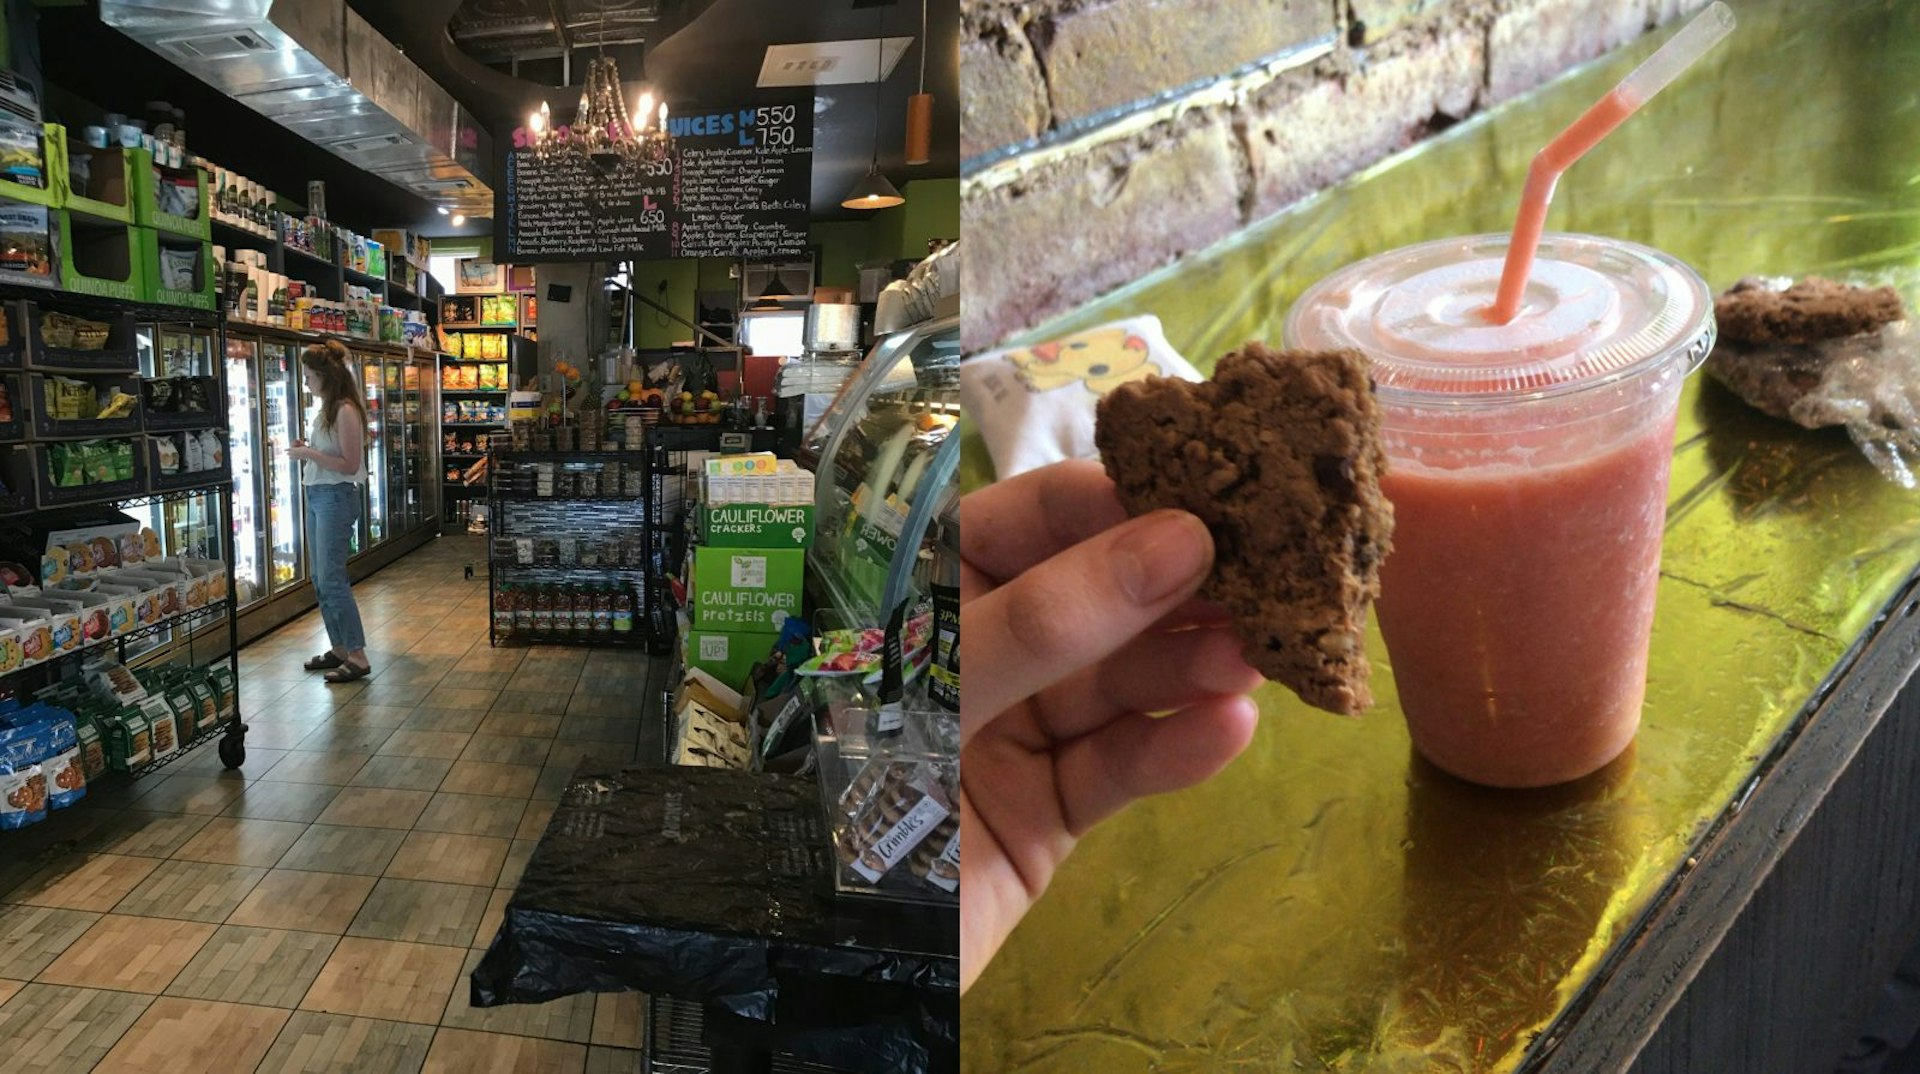 Two images. The left image is of a young woman gazing into a fridge in a NY deli. The second photo shows a half-eaten cookie and a milkshake on a counter.